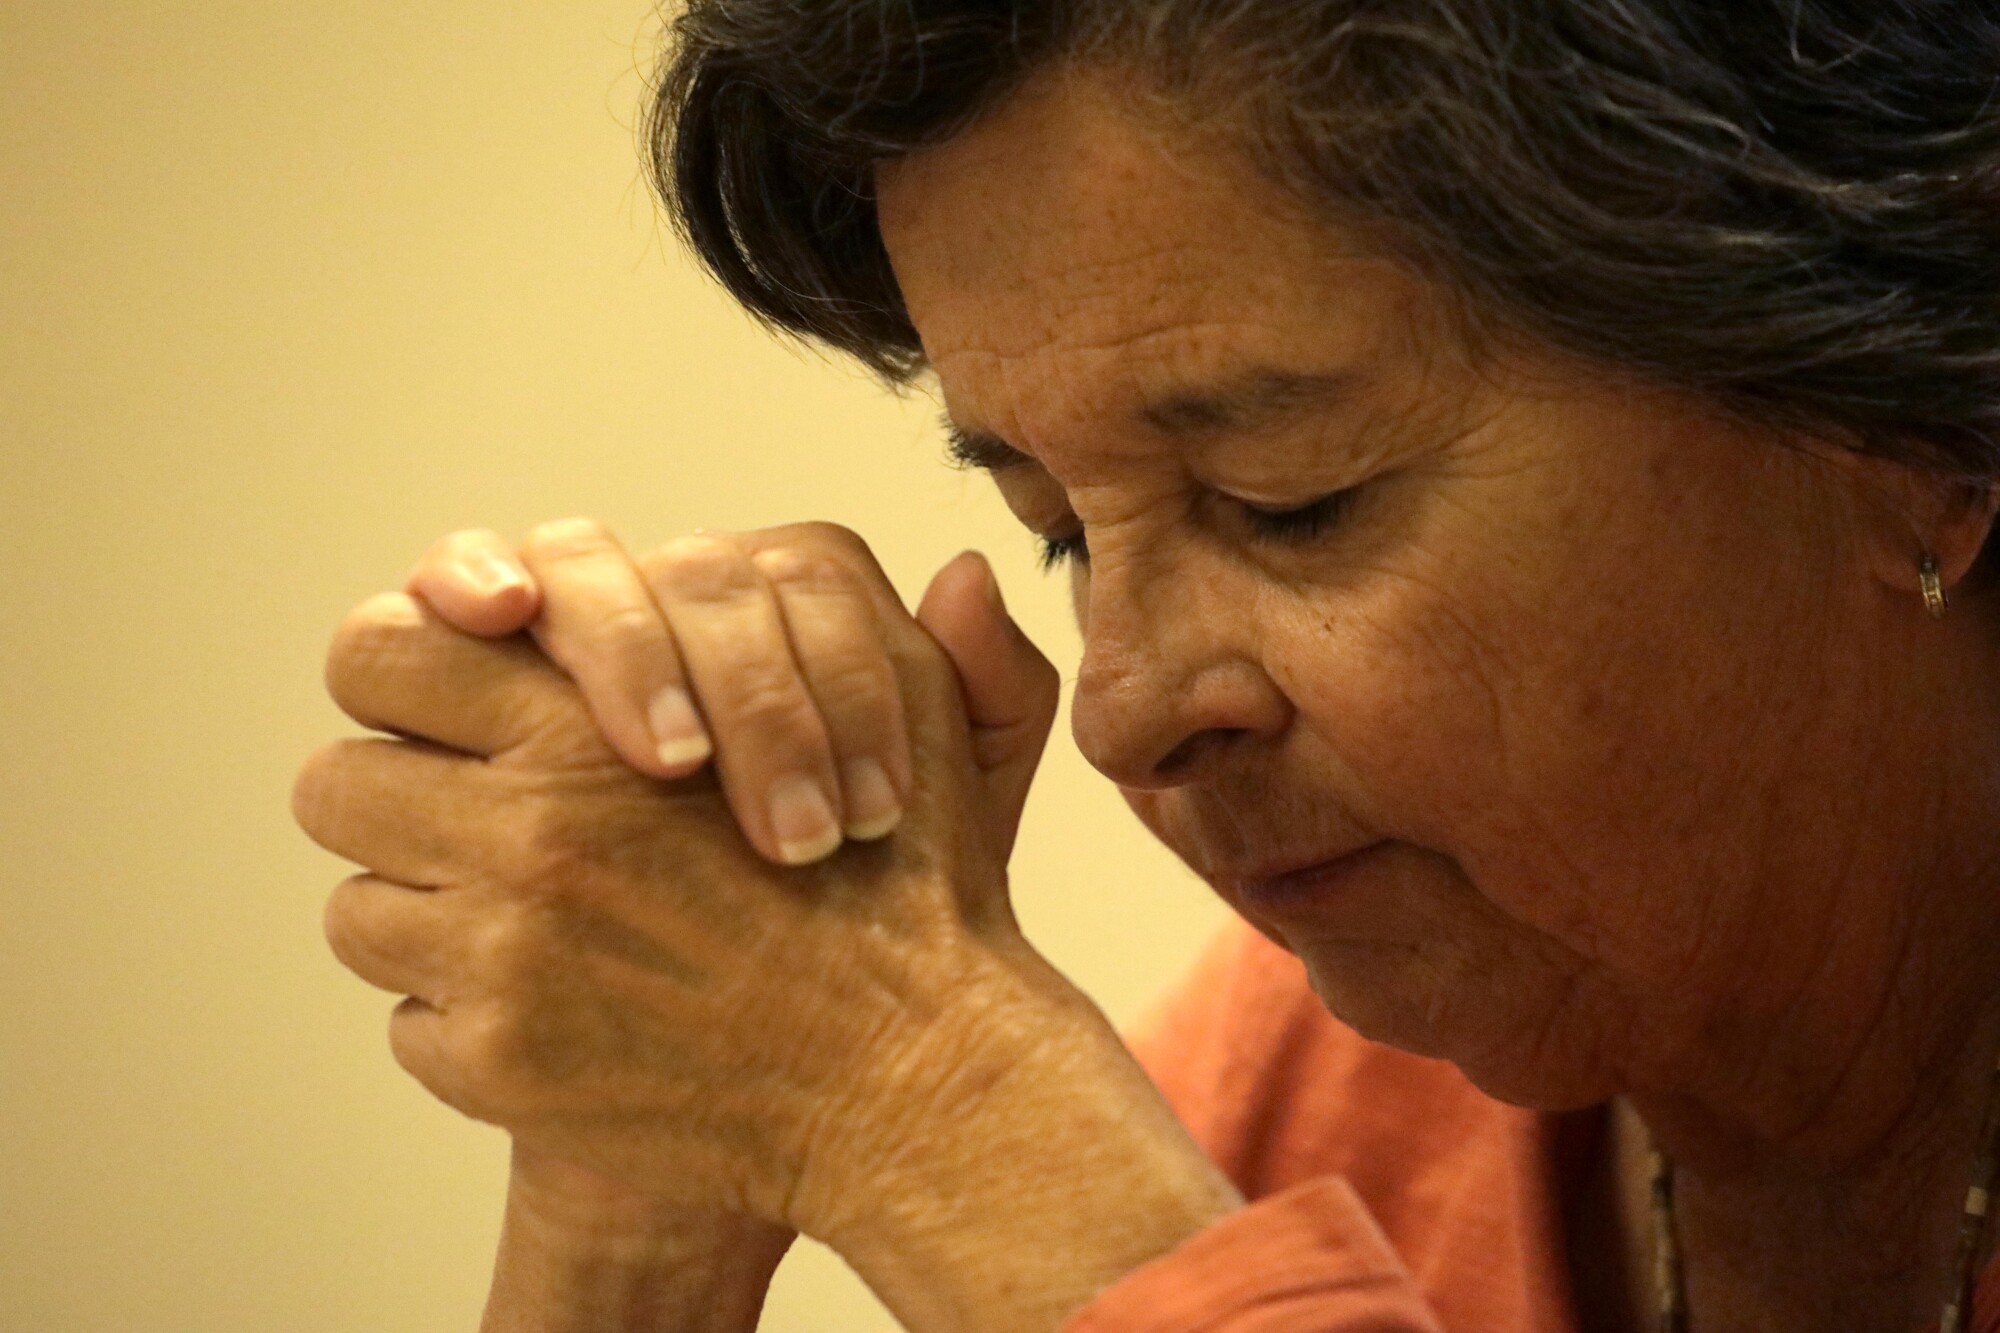 Martha Olivares prays during a monthly meeting of St. Dymphna's Disciples in Yorba Linda.